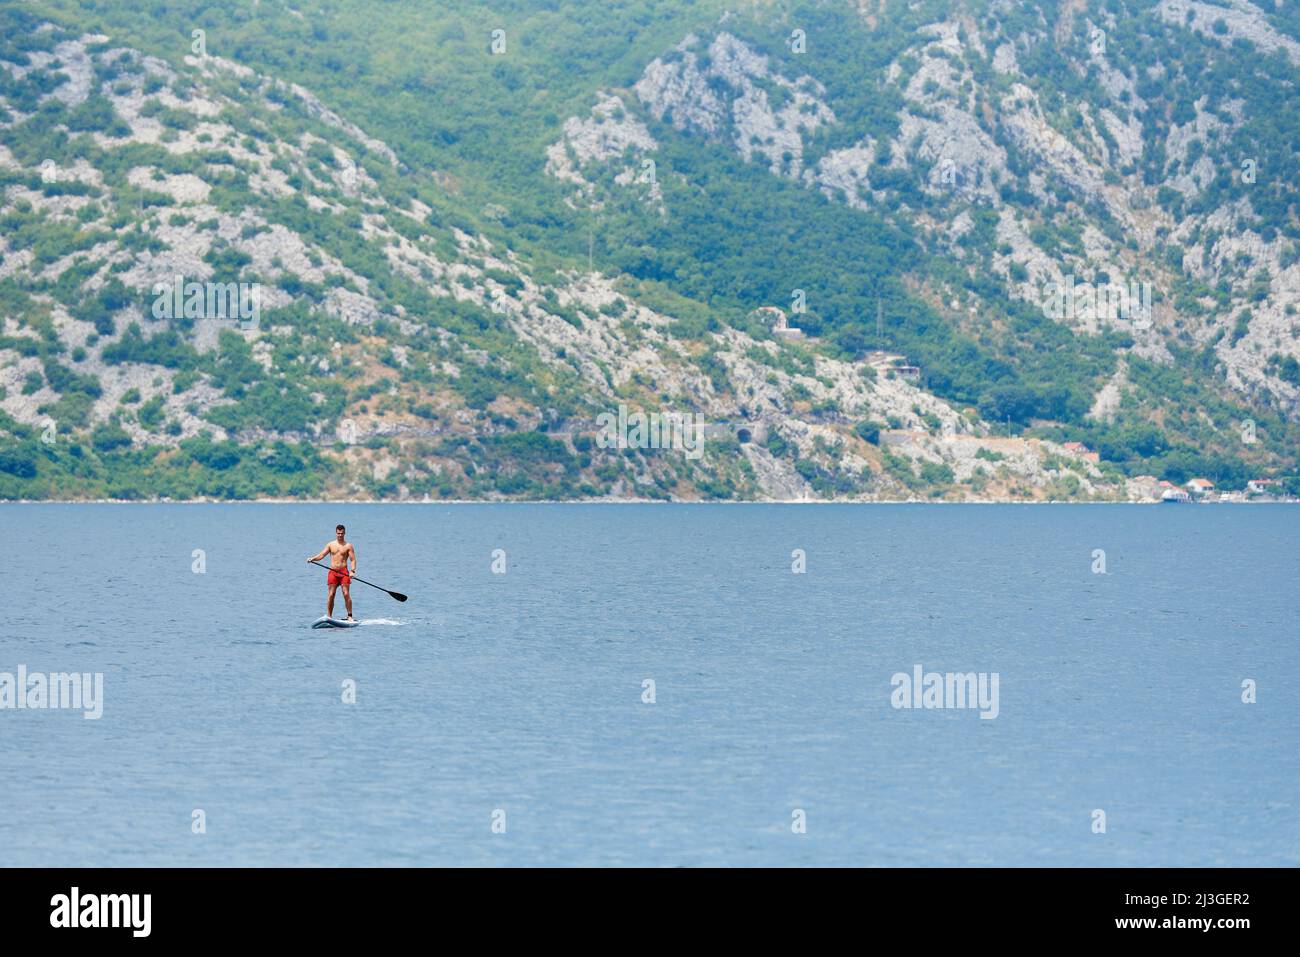 PERAST, MONTENEGRO - JULY 20, 2021: Young man rides on a paddle board in the sea Stock Photo